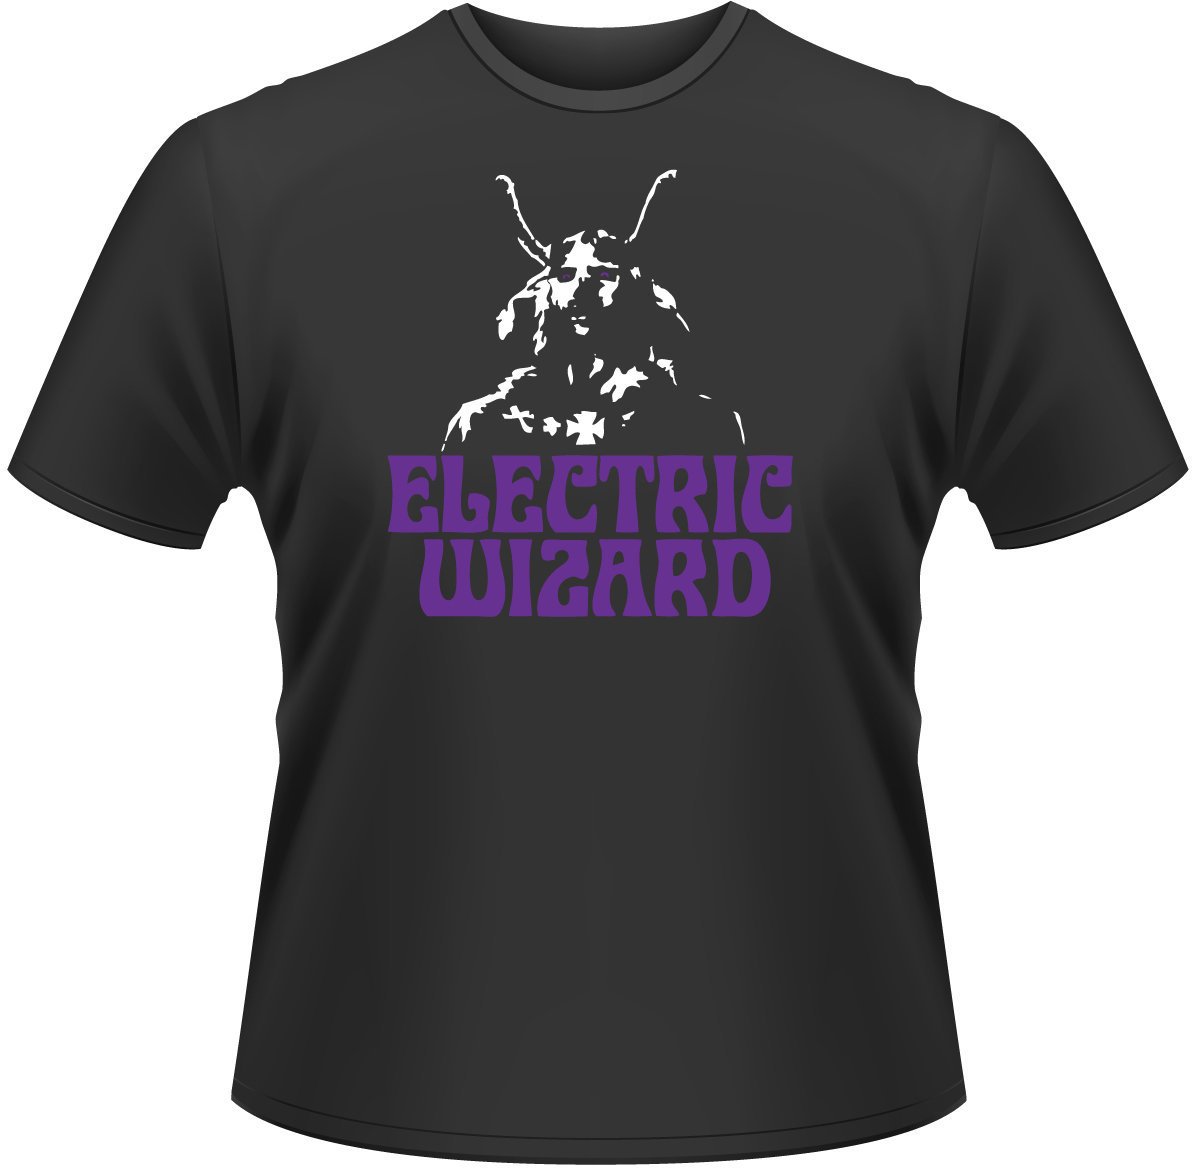 Shirt Electric Wizard Shirt Witchcult Today Black S